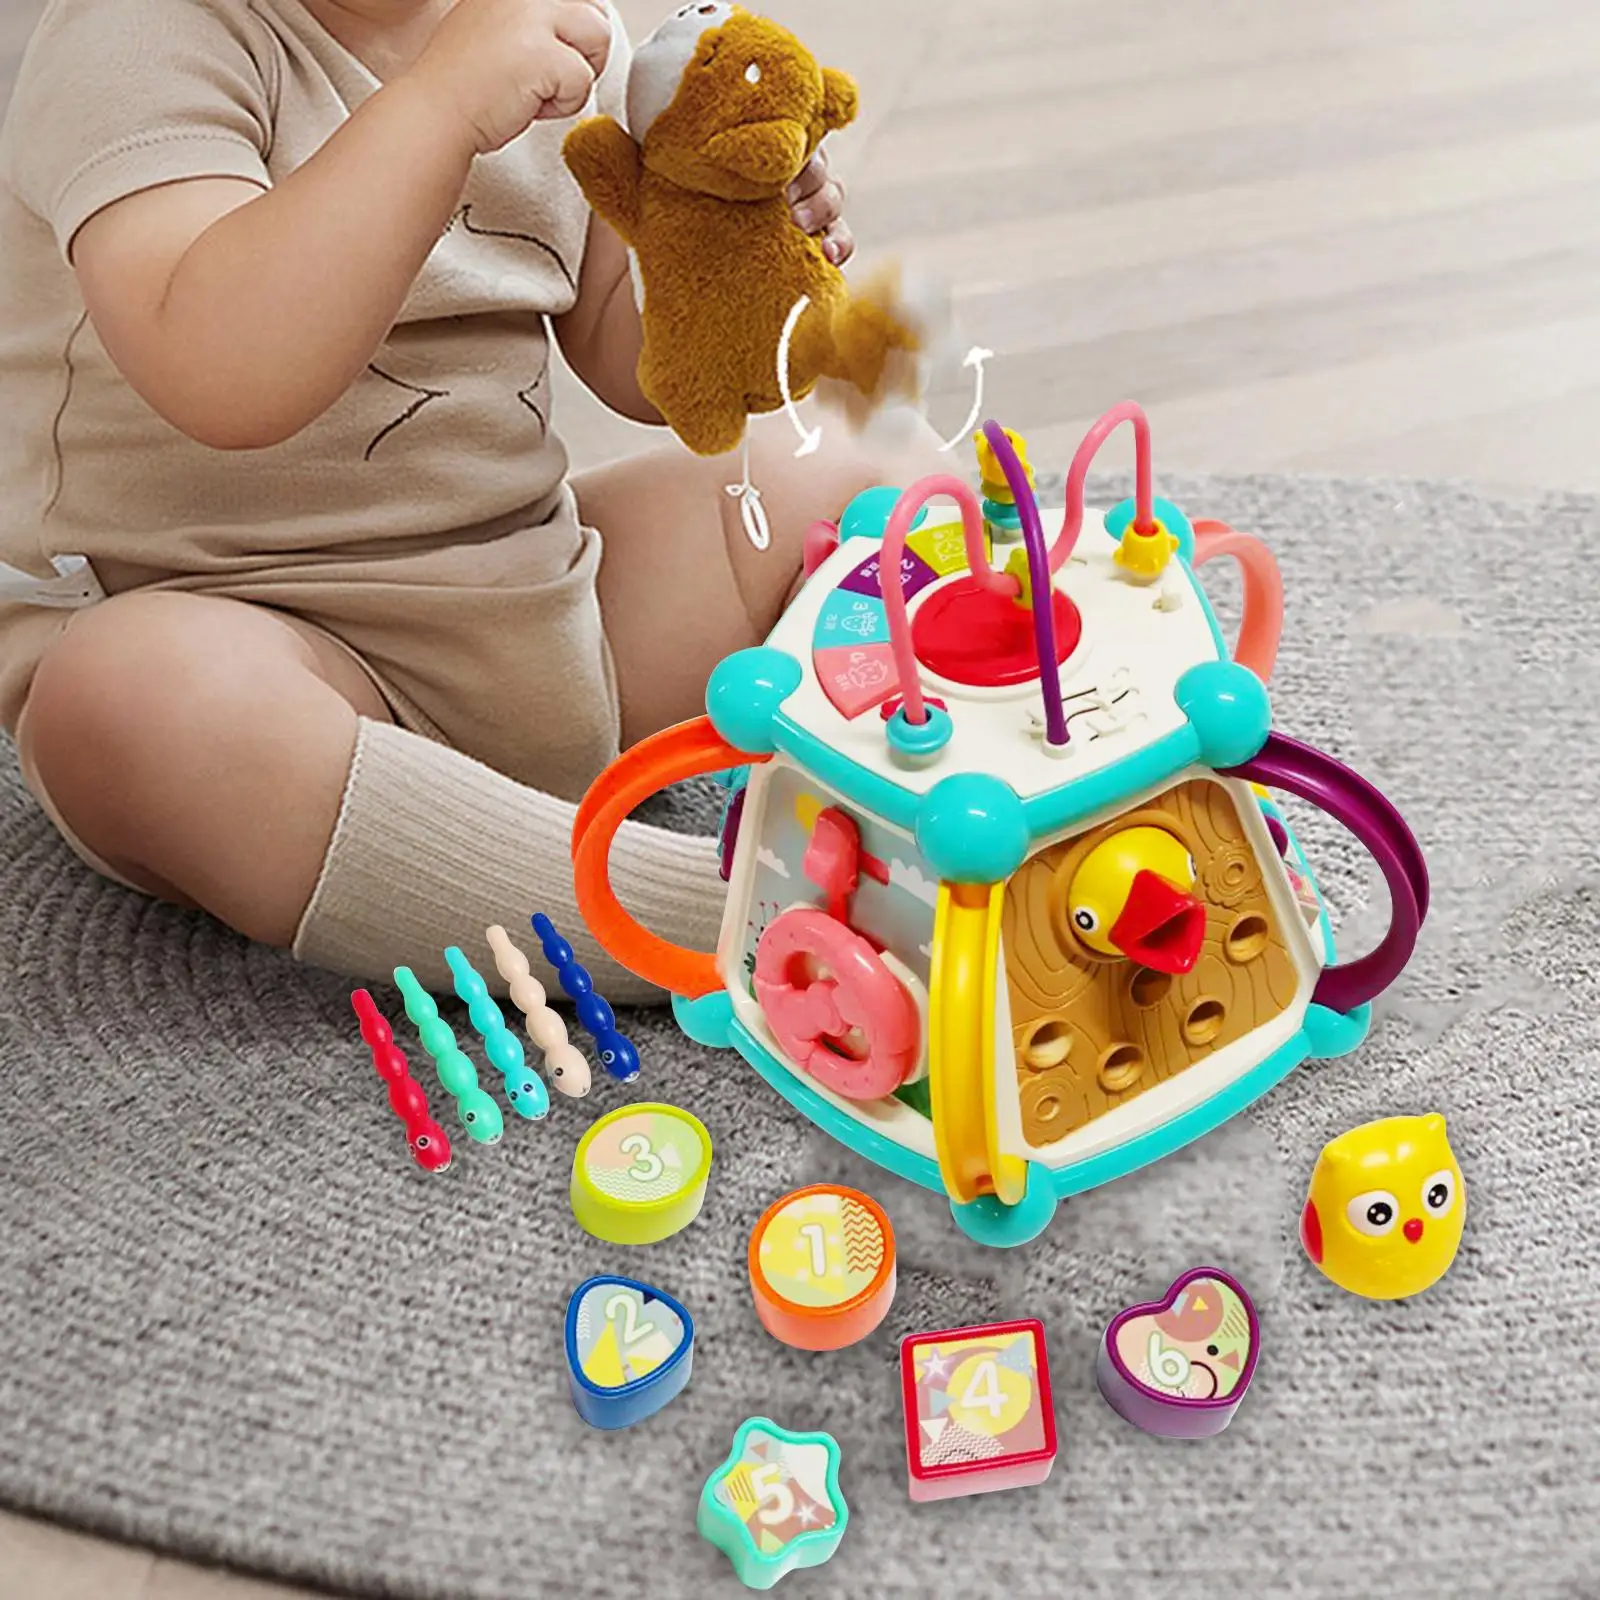 Activity Cube Toy Learning Puzzle Toy Musical Toys 6 Sided Activity Center for Boys Girls Toddlers Birthday Gift